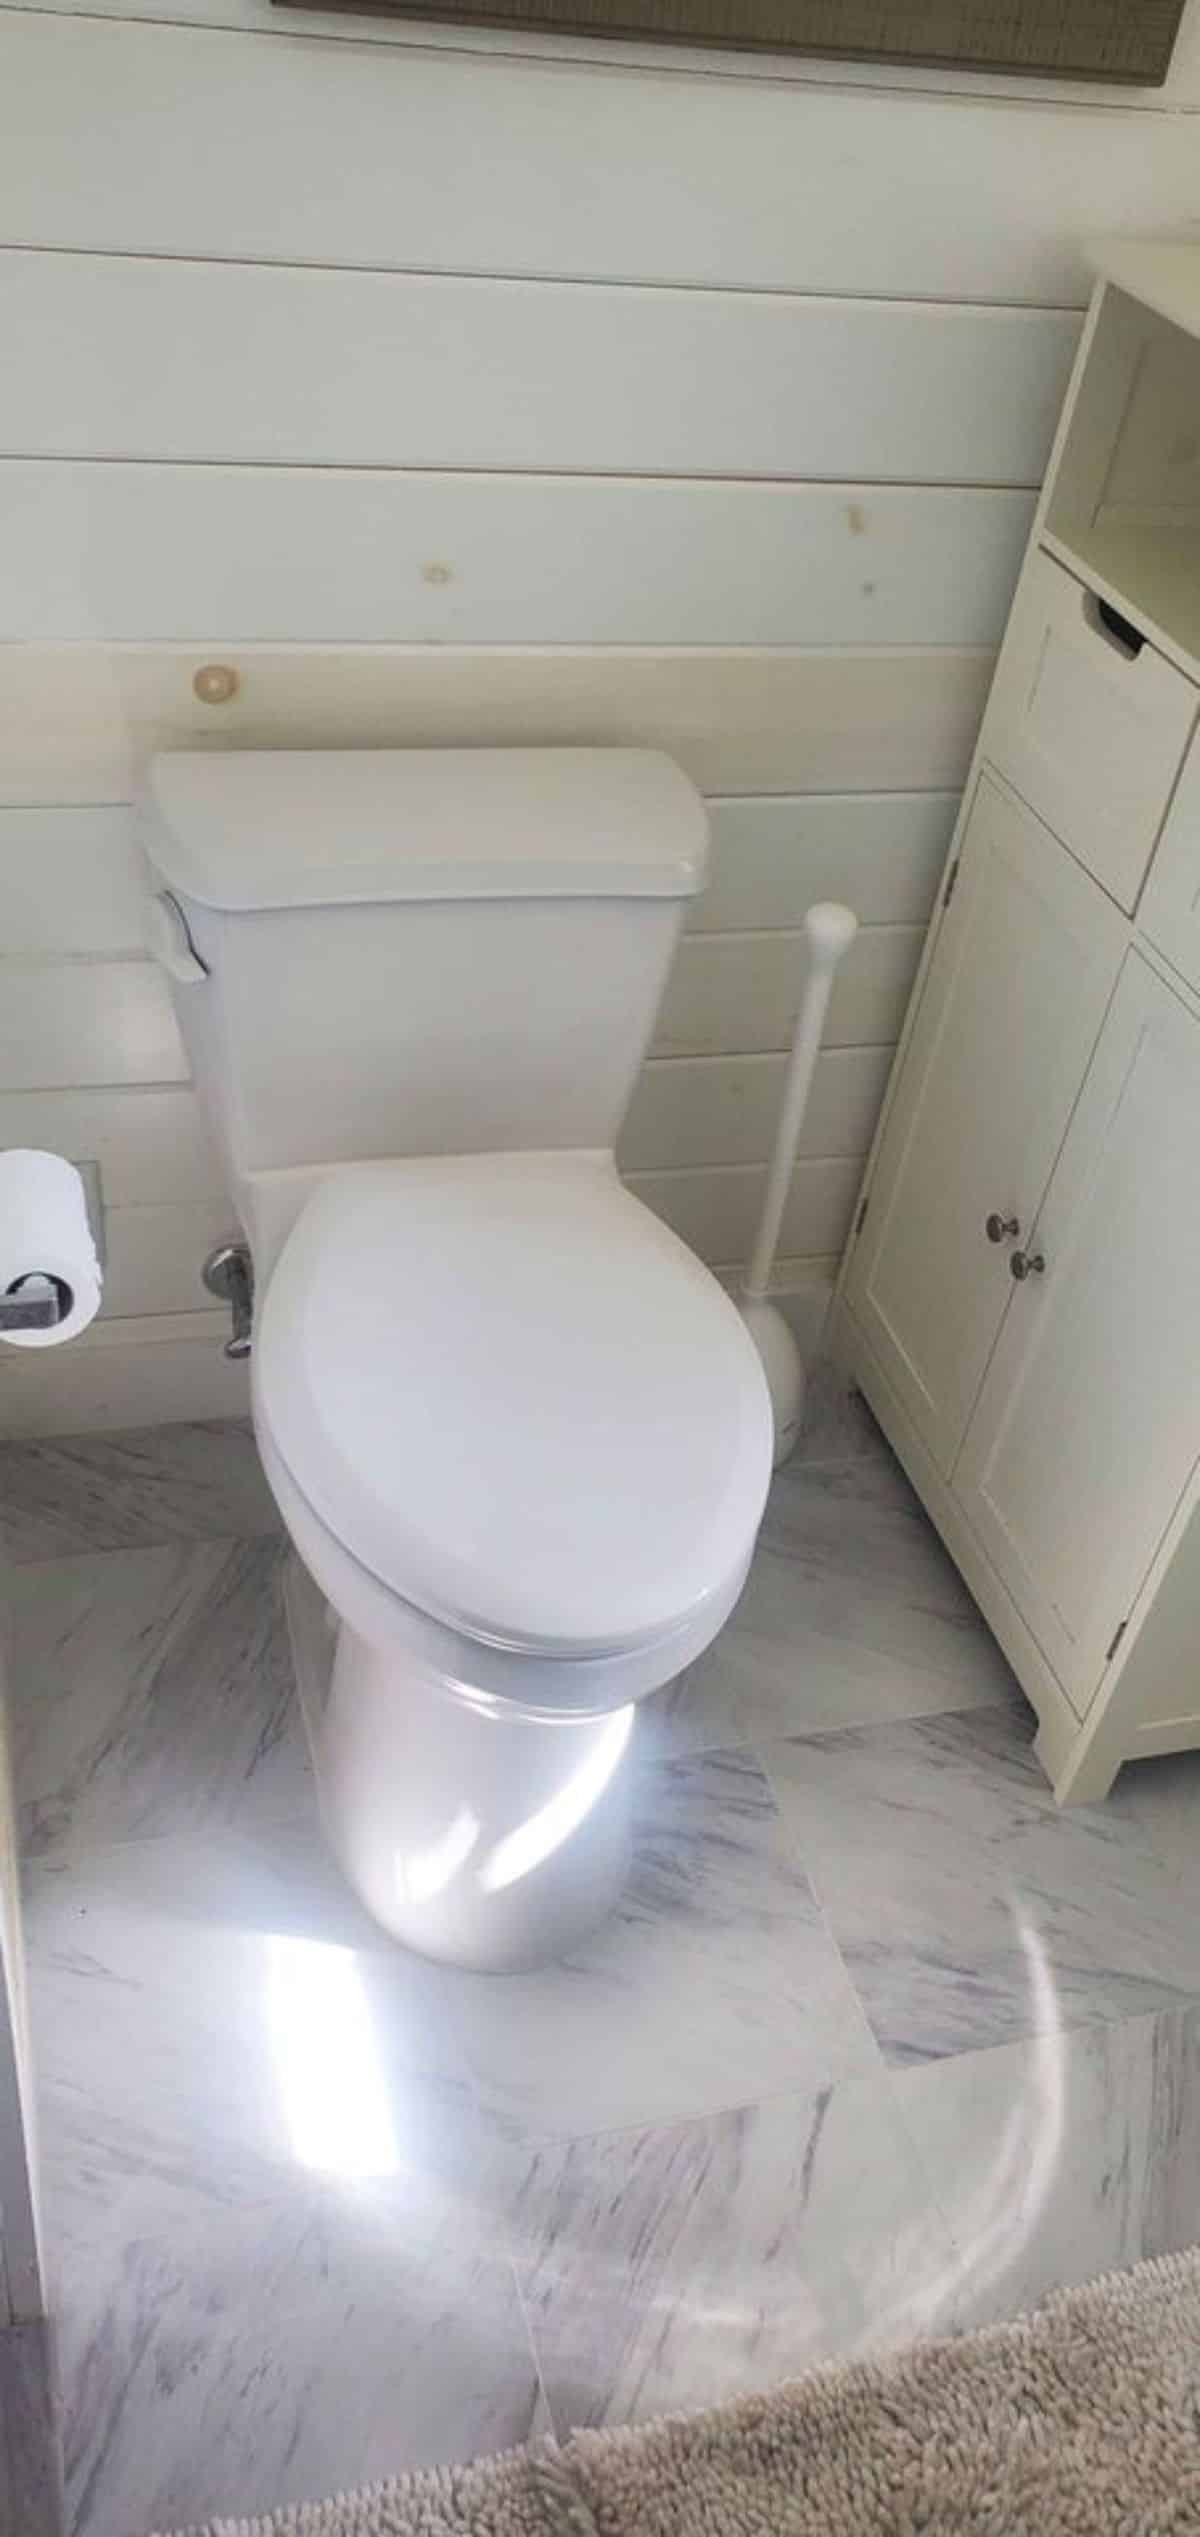 Standard toilet in bathroom of 24’ Tiny House